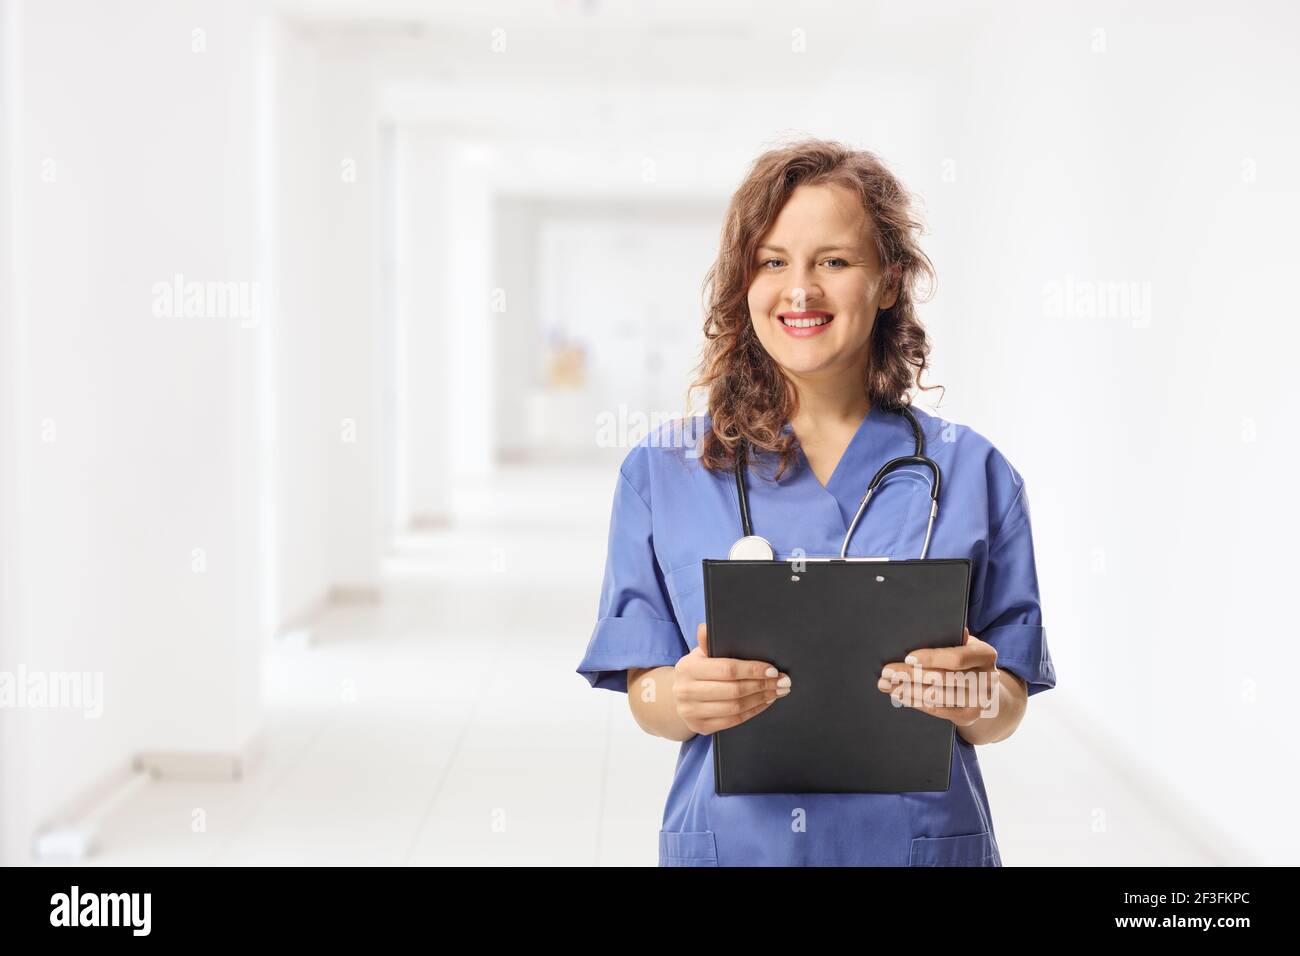 Young female intern in a blue uniform holding a clipboard in a hospital corridor Stock Photo